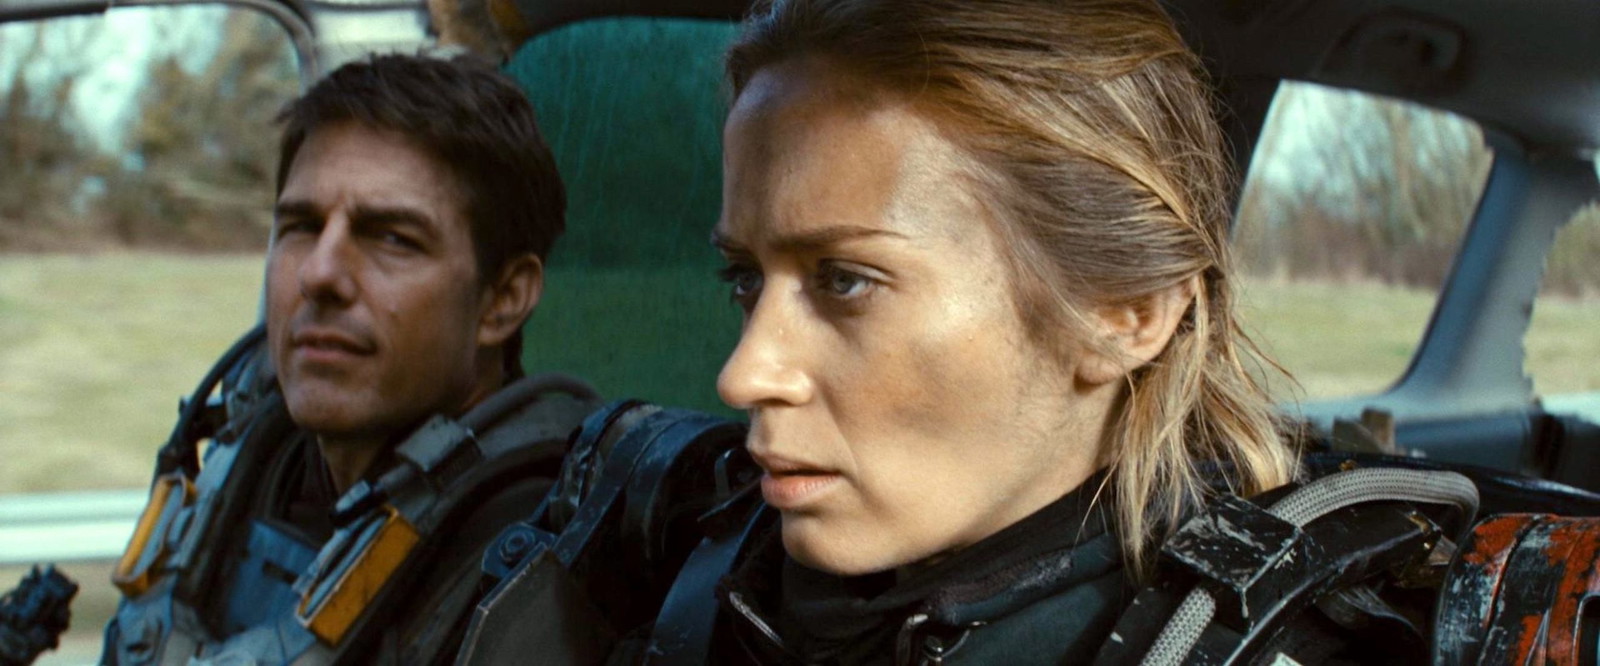 Tom Cruise looks at Emily Blunt in a still from Edge of Tomorrow | Warner Bros. Pictures